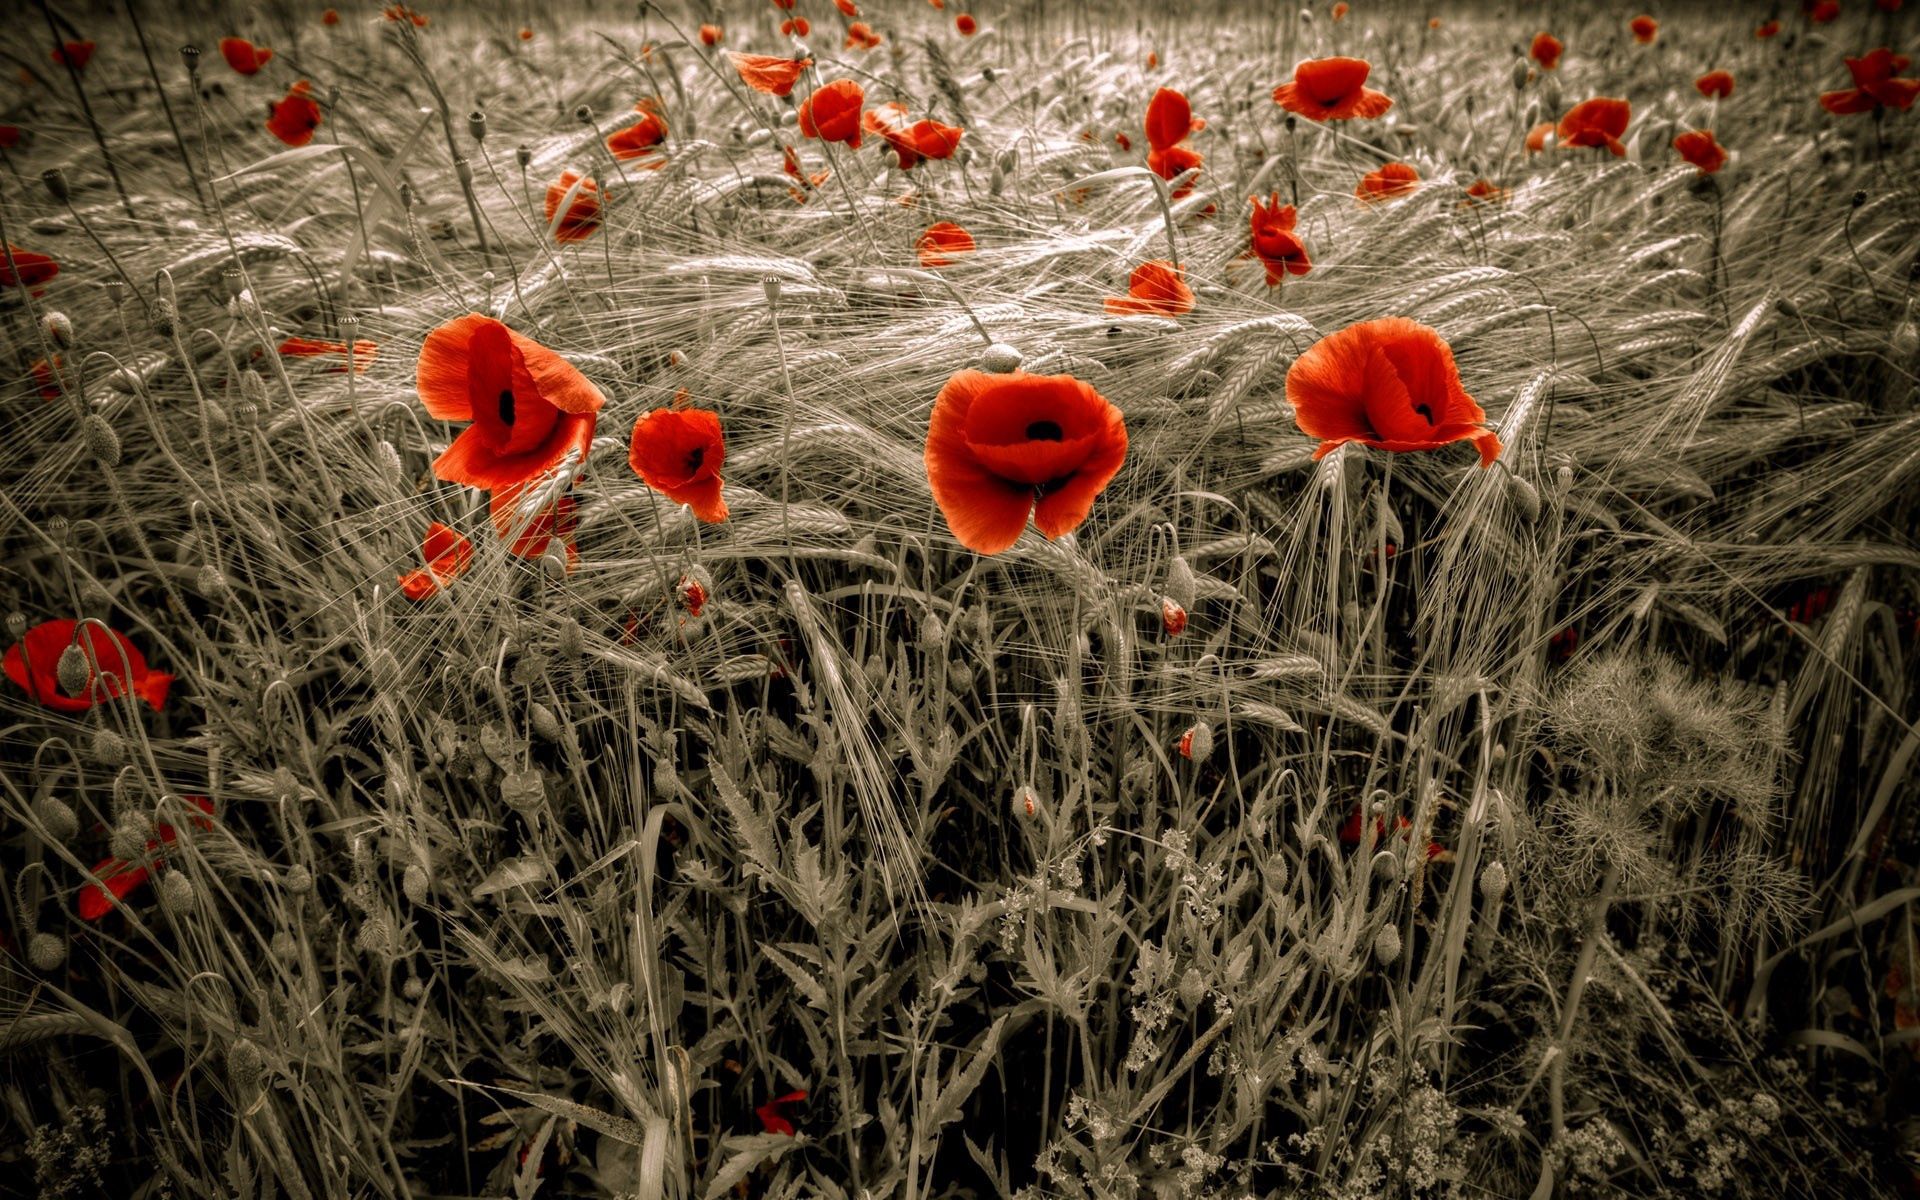 1920x1080 Background nature, flowers, poppies, red, field, ears, spikes